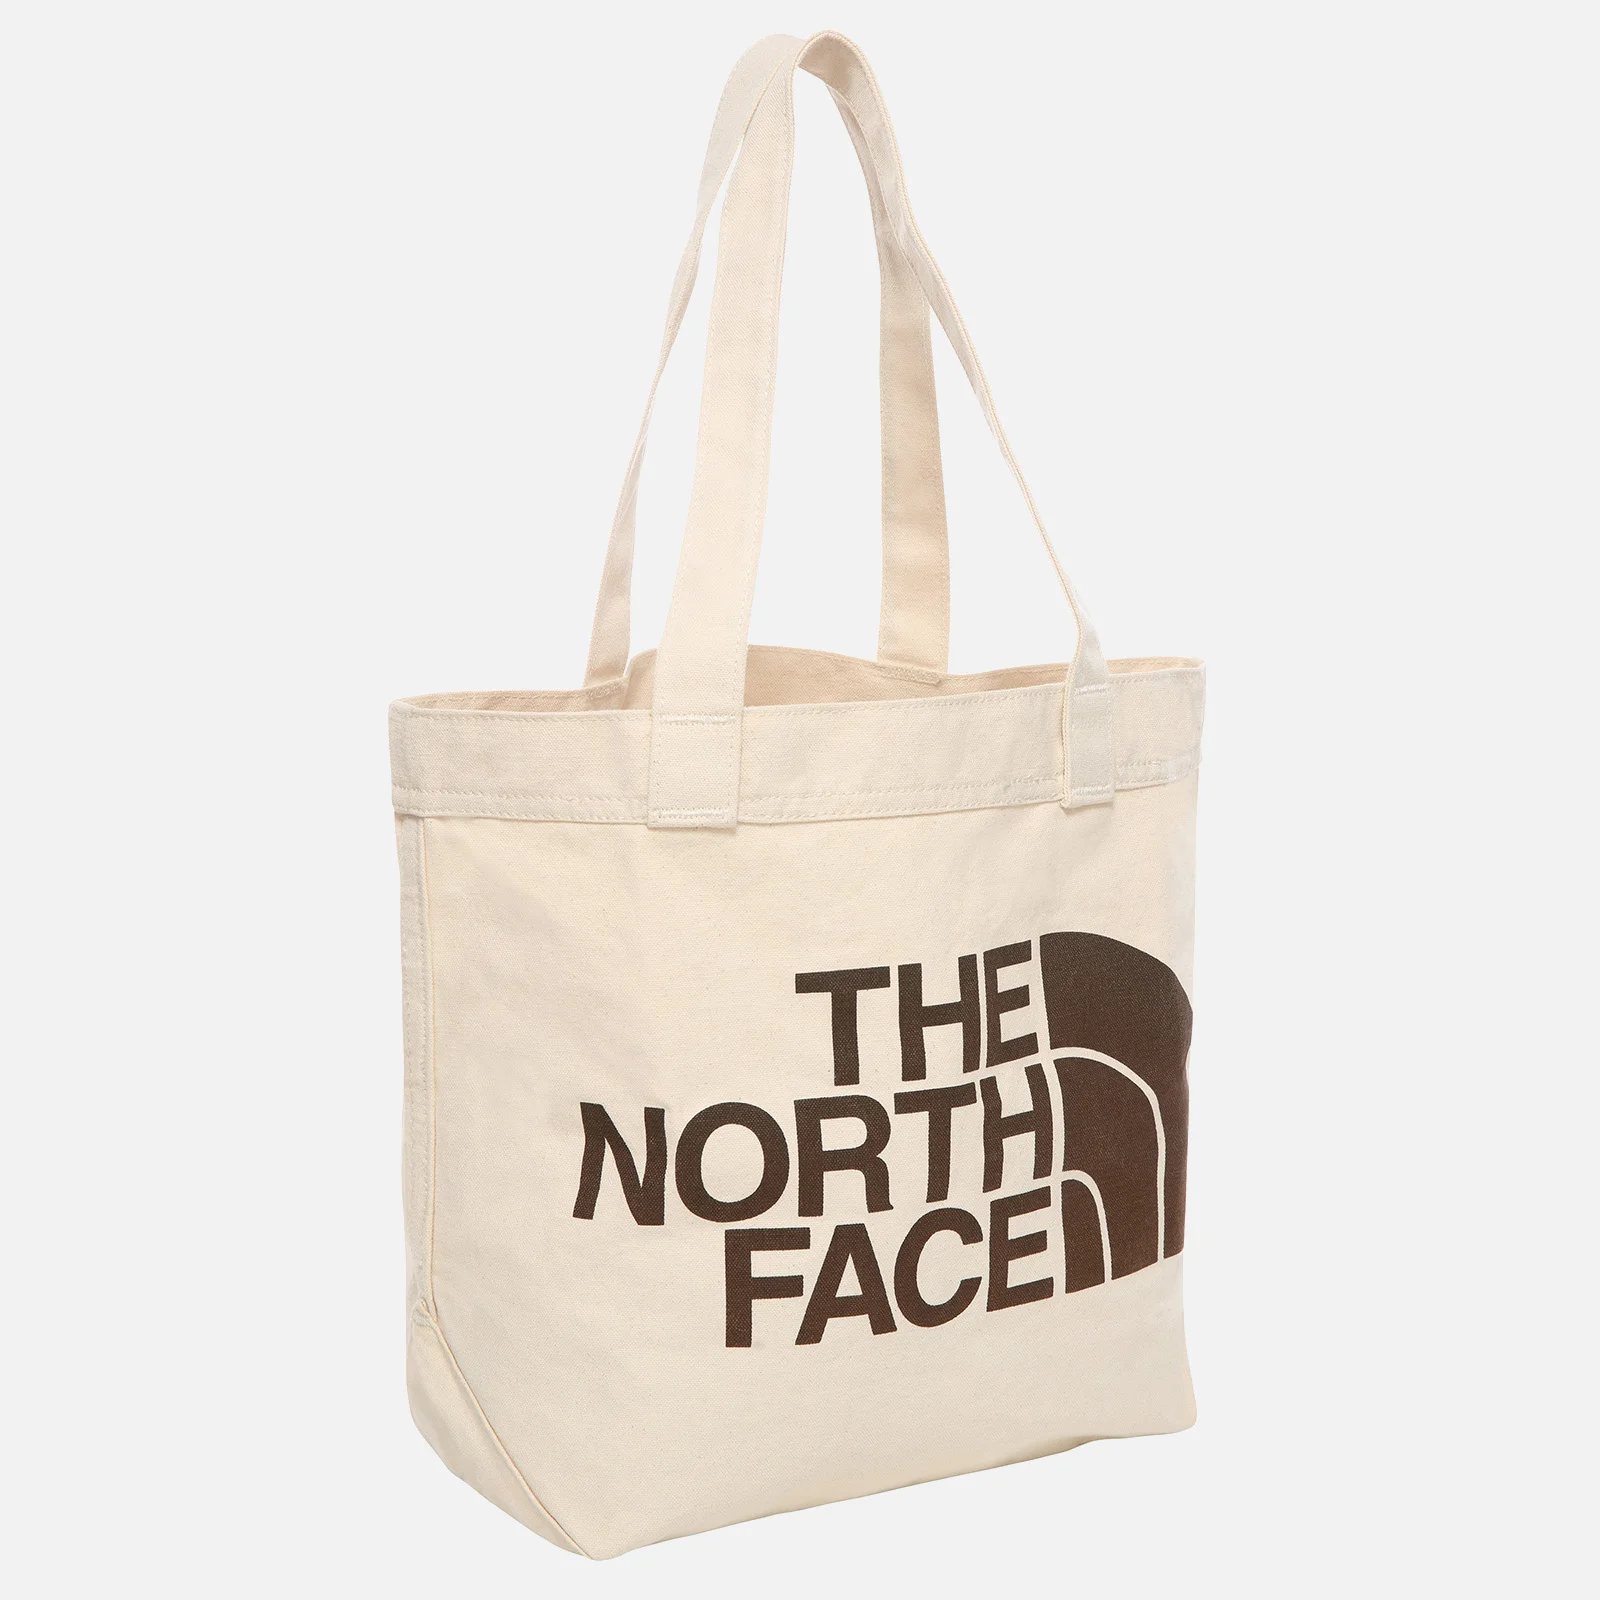 The North Face Basic Cotton Tote Bag - White/Brown Image 1